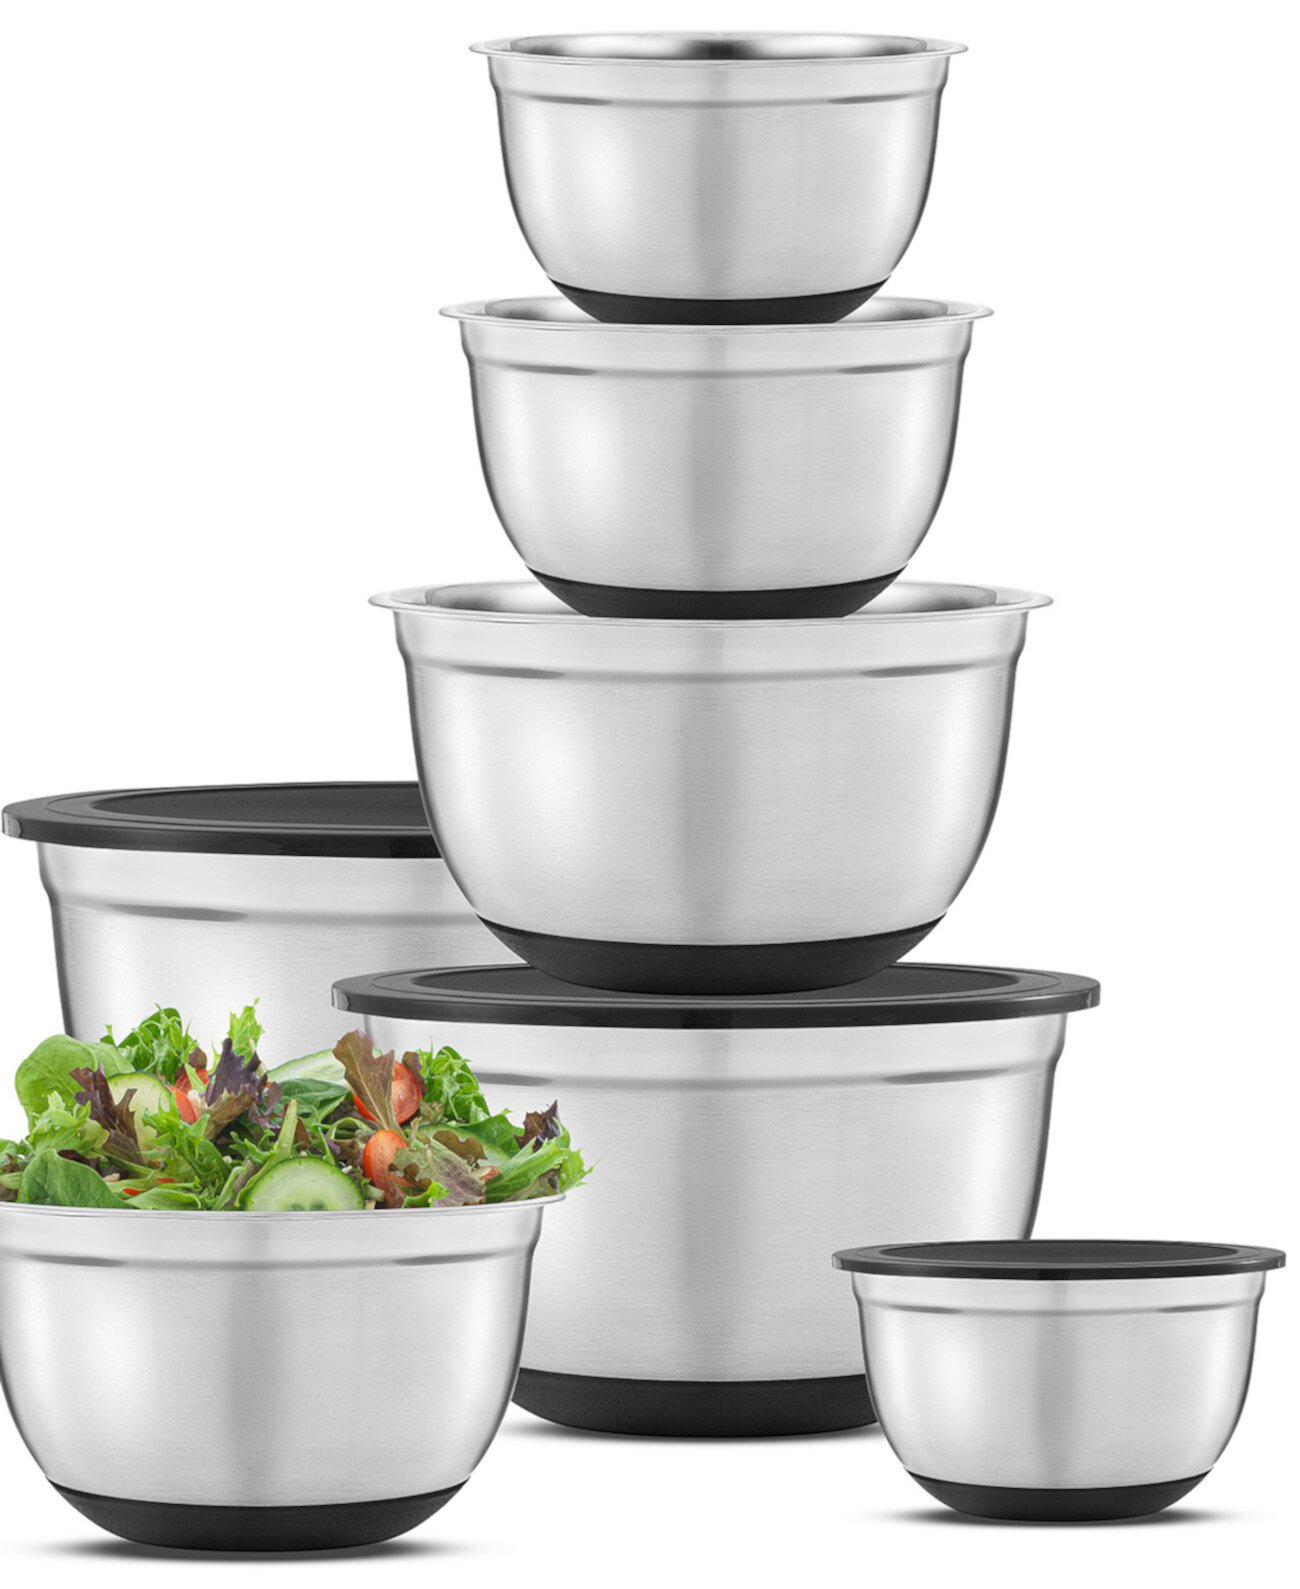 Stainless Steel Mixing Bowls with Lids Set of 7 JoyJolt